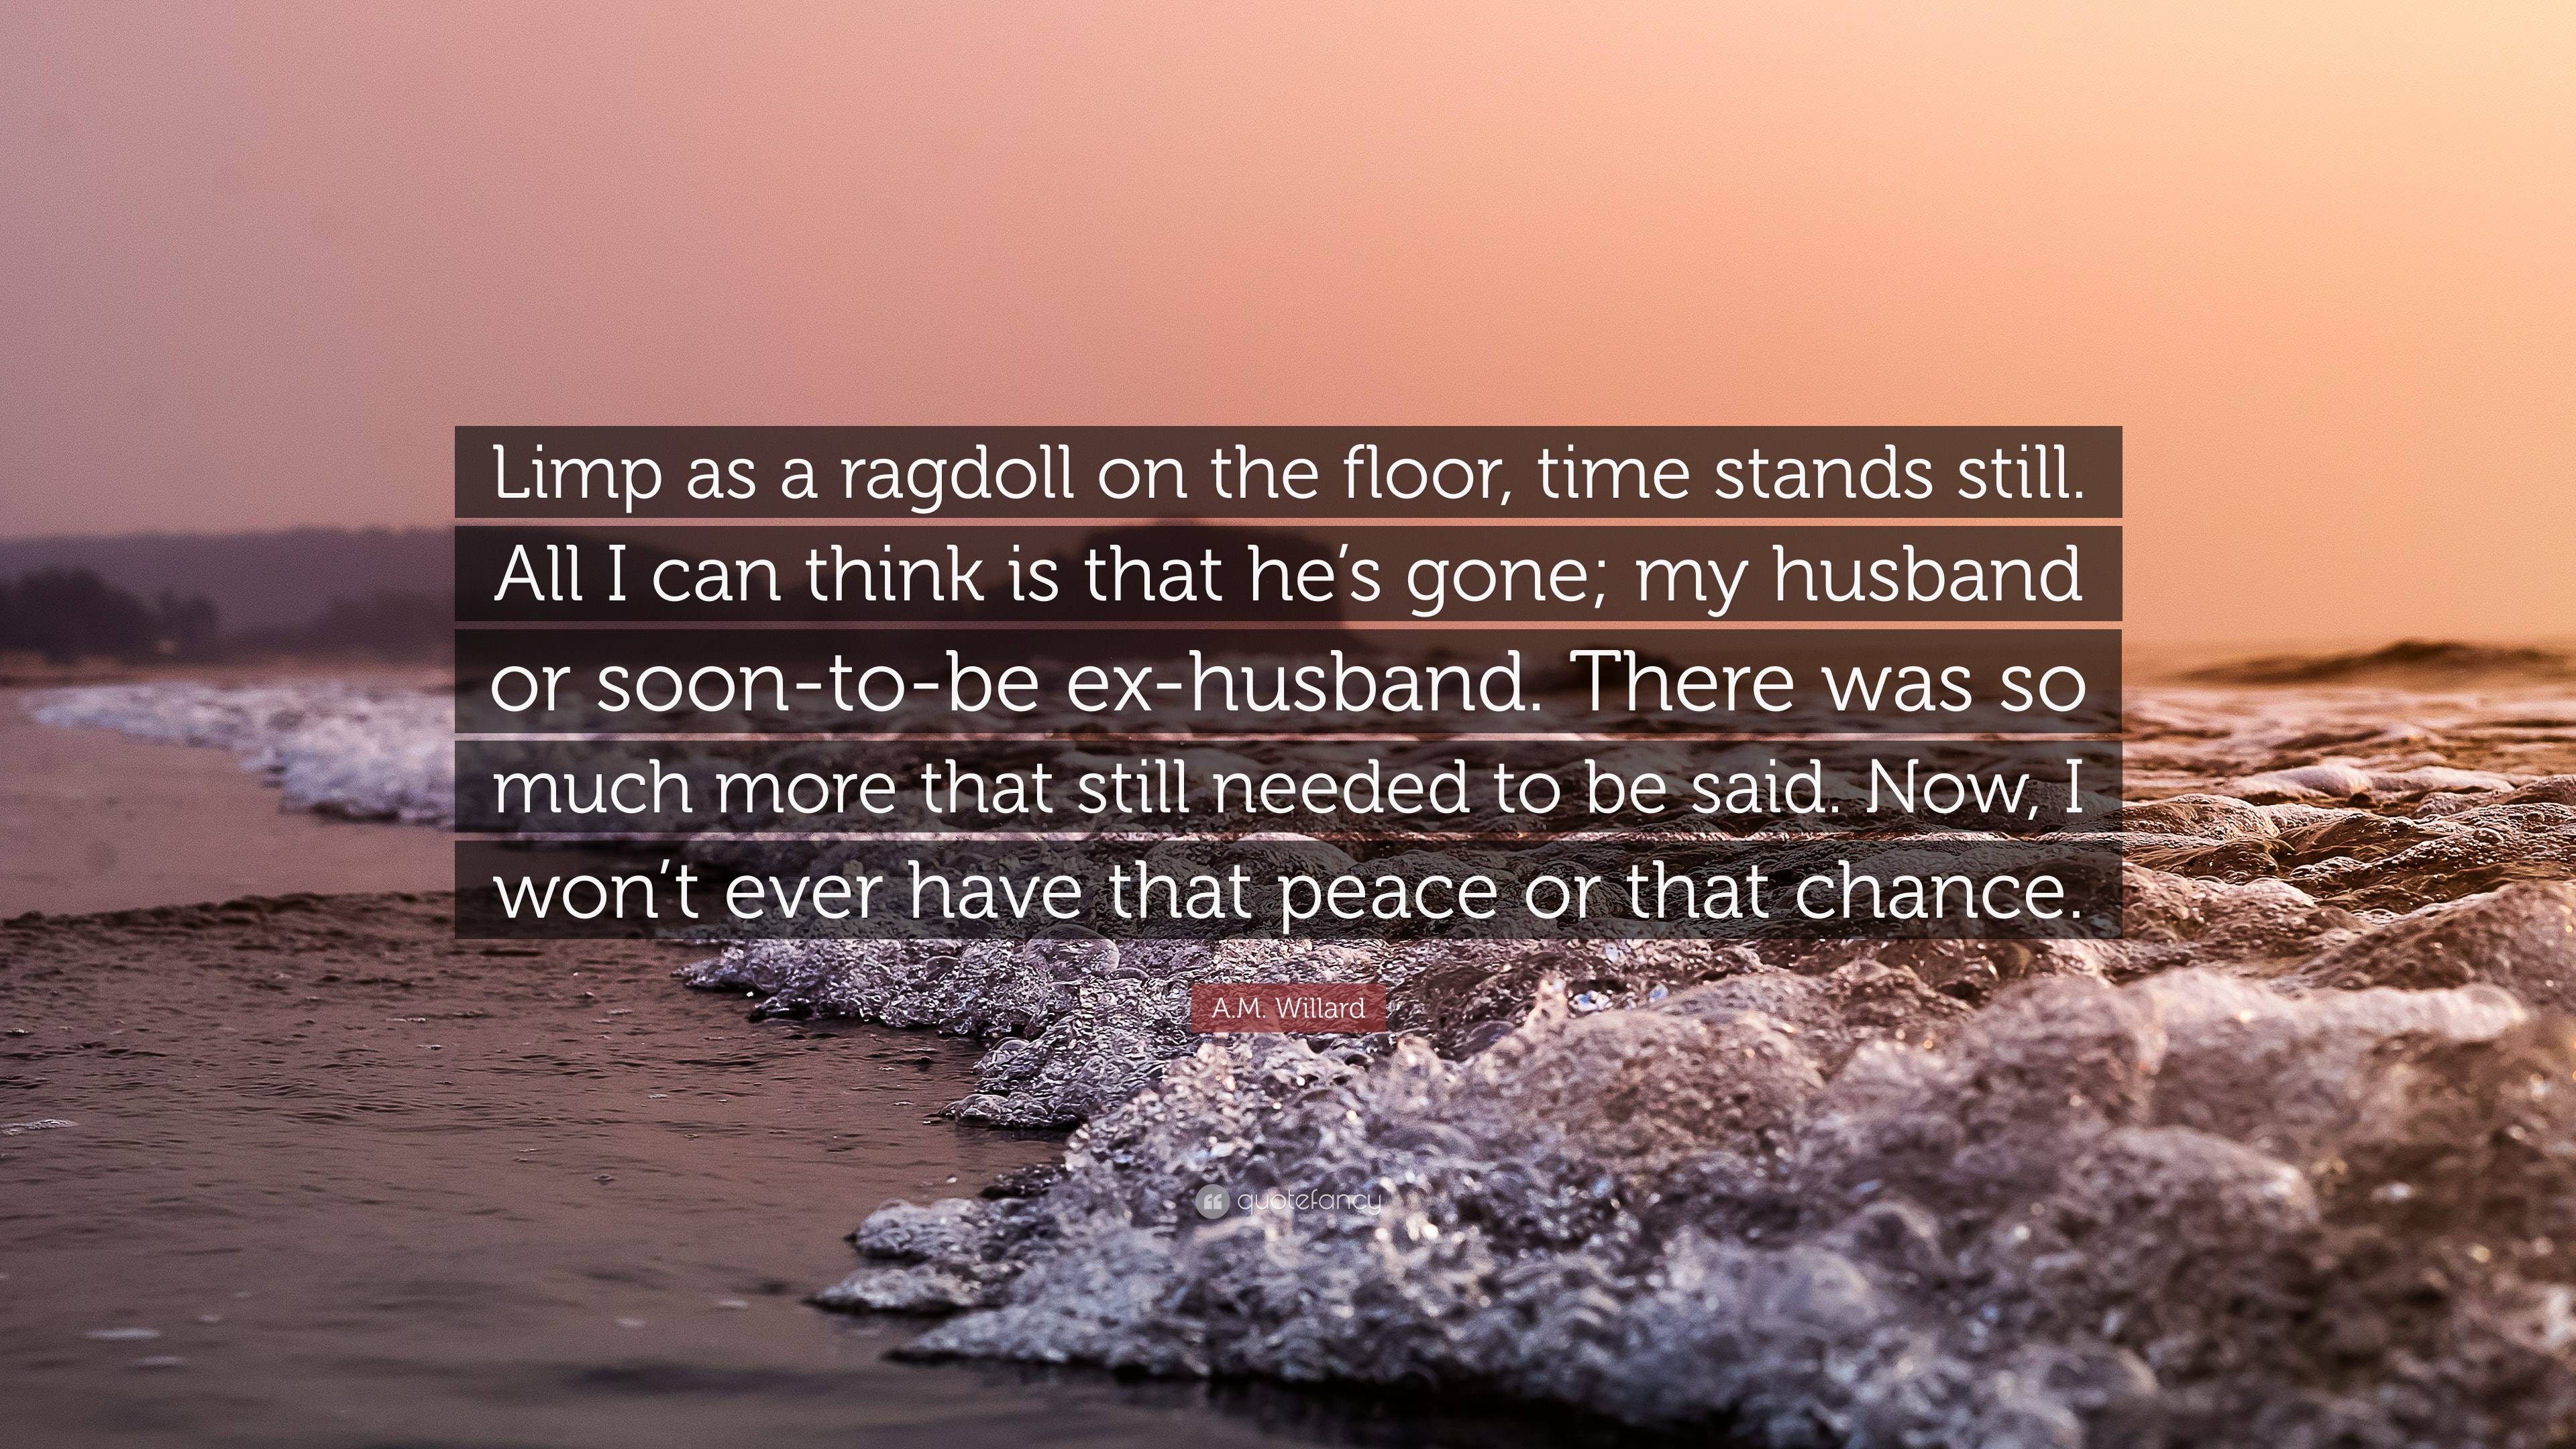 A.M. Willard Quote: “Limp as a ragdoll on the floor, time stands